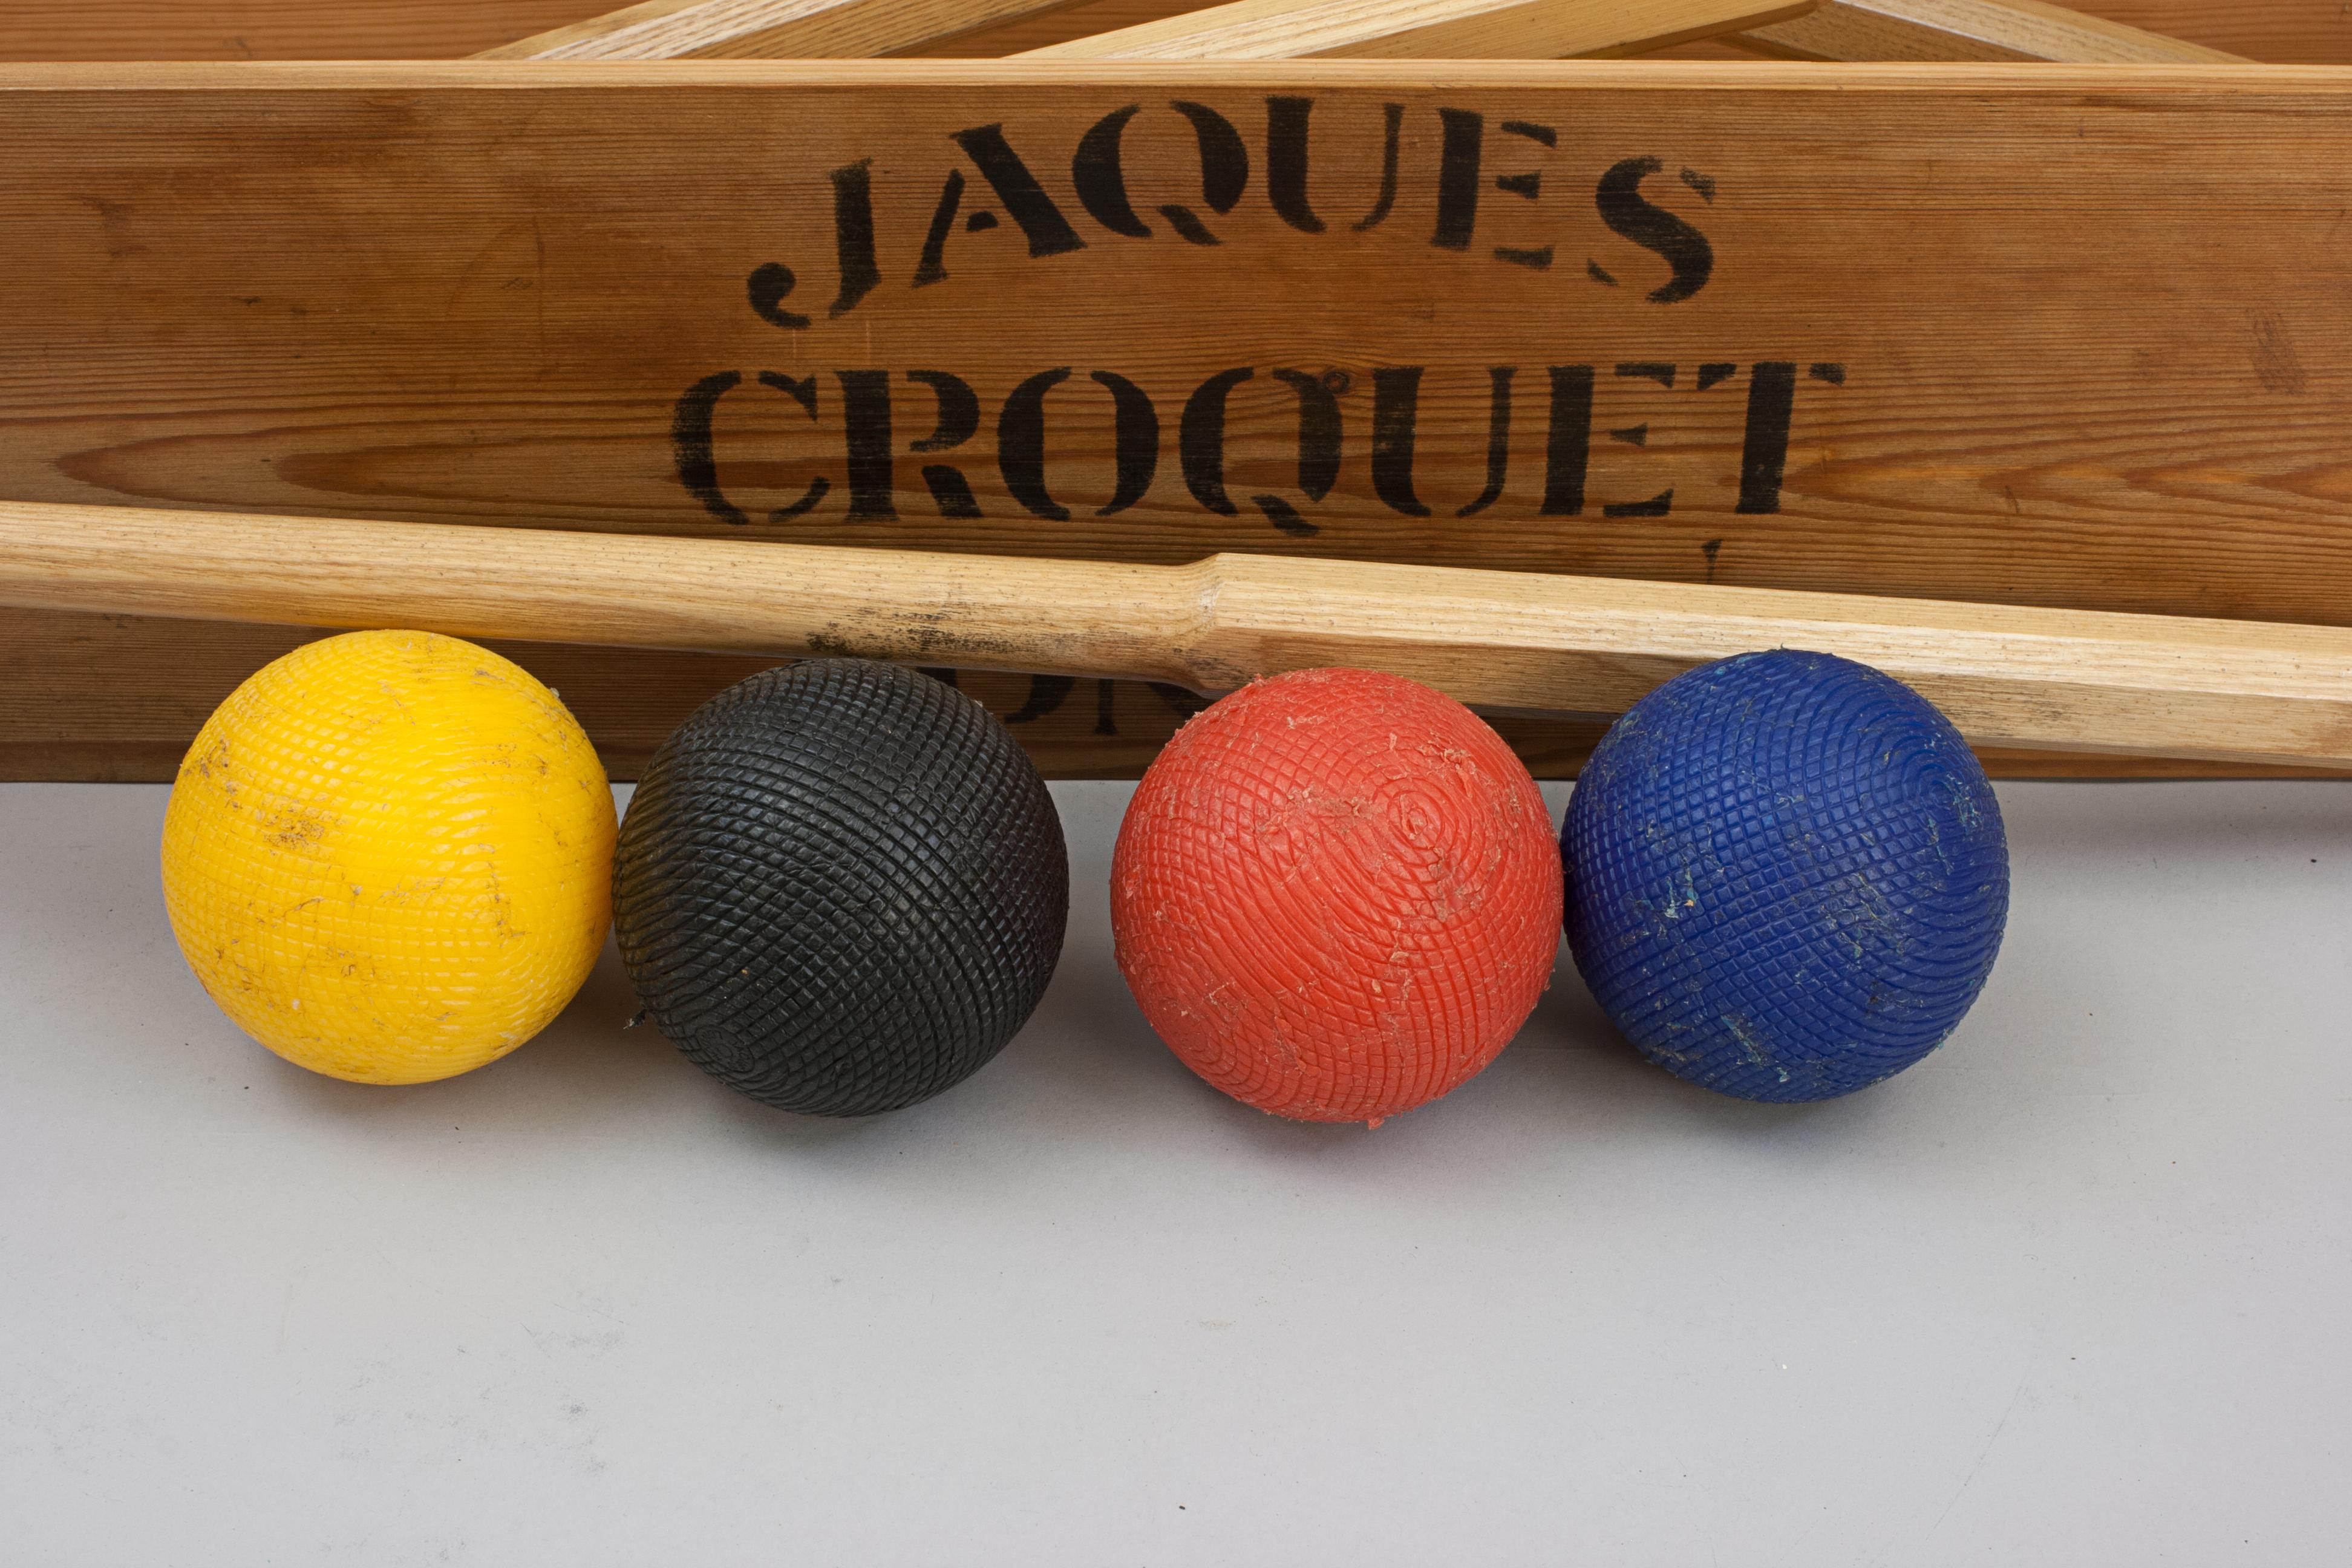 Vintage Jaques Brass Bound Oxford Croquet Set in Pine Box For Sale 5